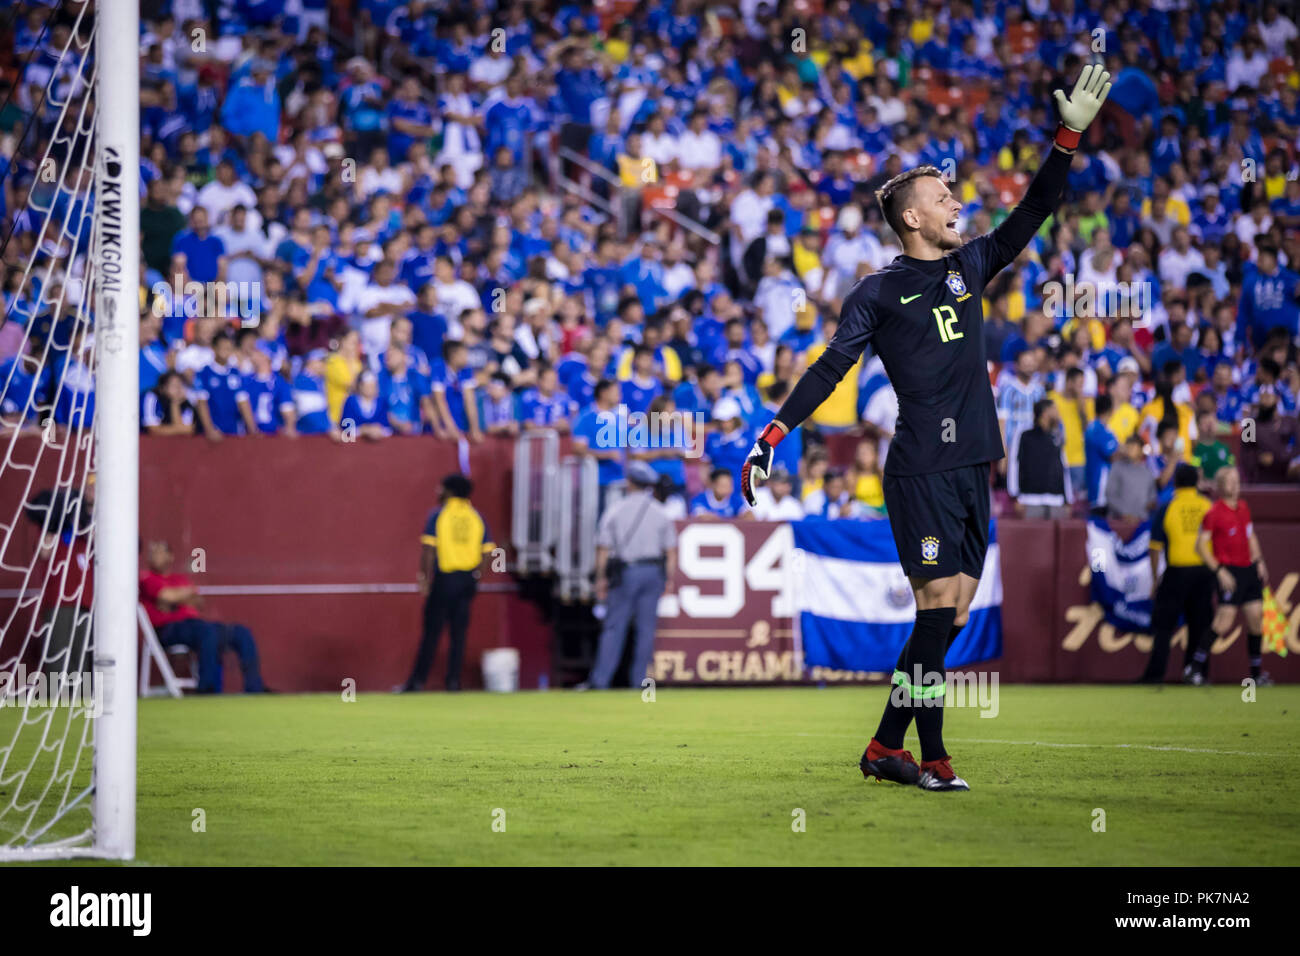 Landover, Maryland, USA. 11th Sep, 2018. Brazil goalkeeper Neto (12) reacts during the second half of an International Friendly match between Brazil and El Salvador at FedExField in Landover, Maryland. Scott Taetsch/CSM/Alamy Live News Stock Photo